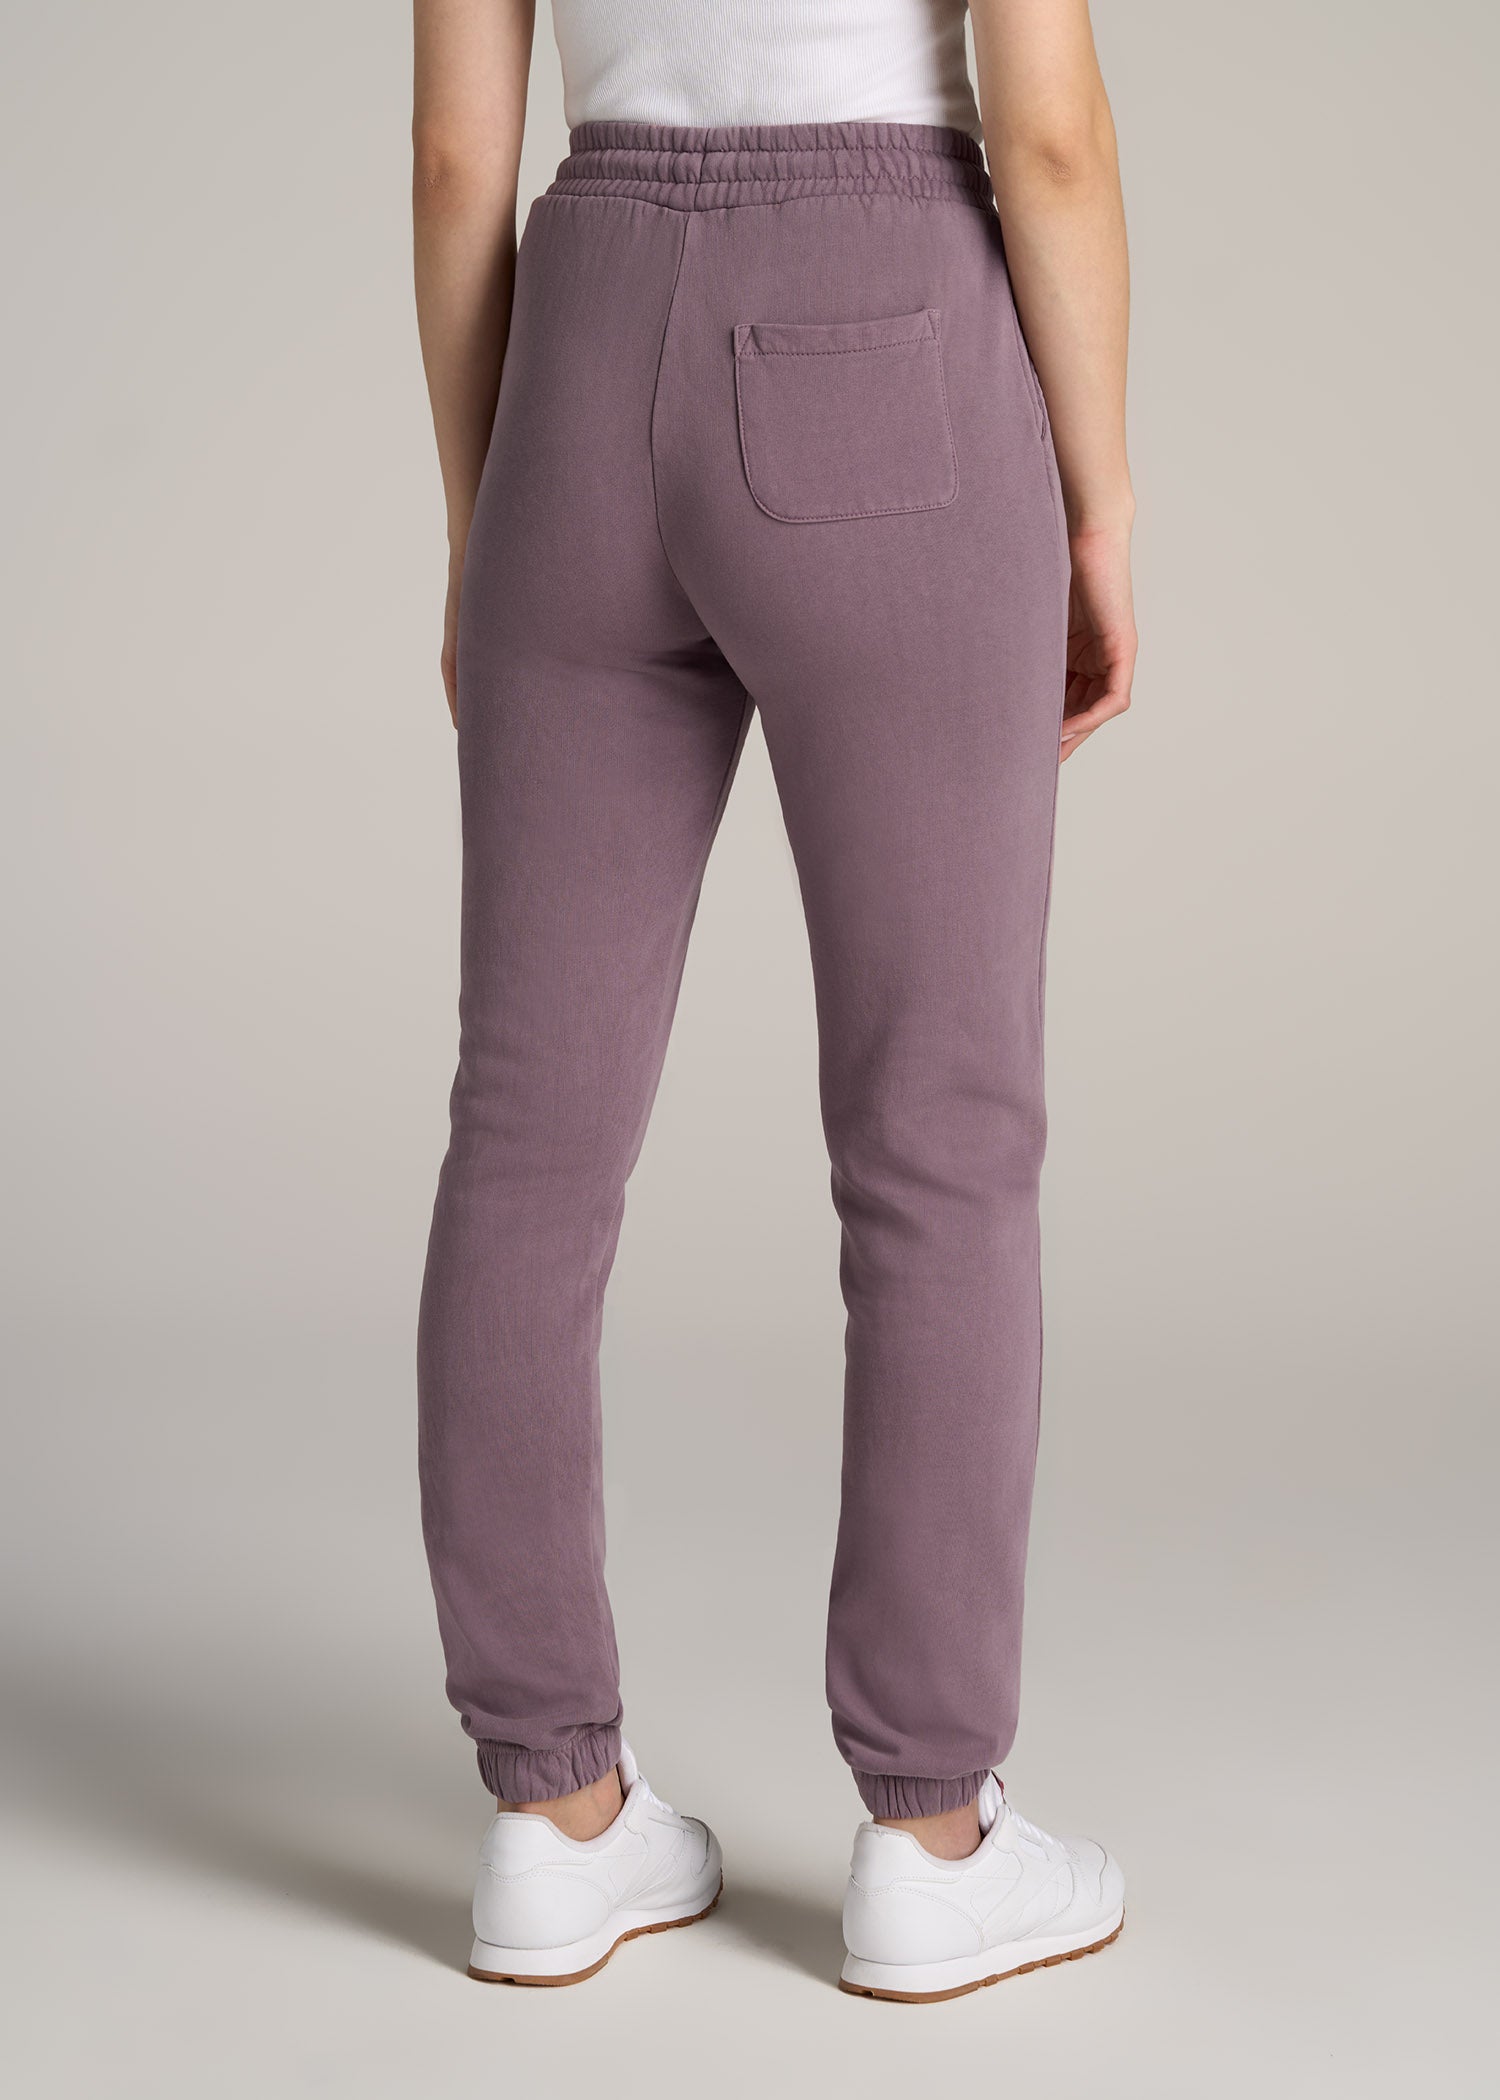 Pink high-rise joggers – The Fashion Carriage